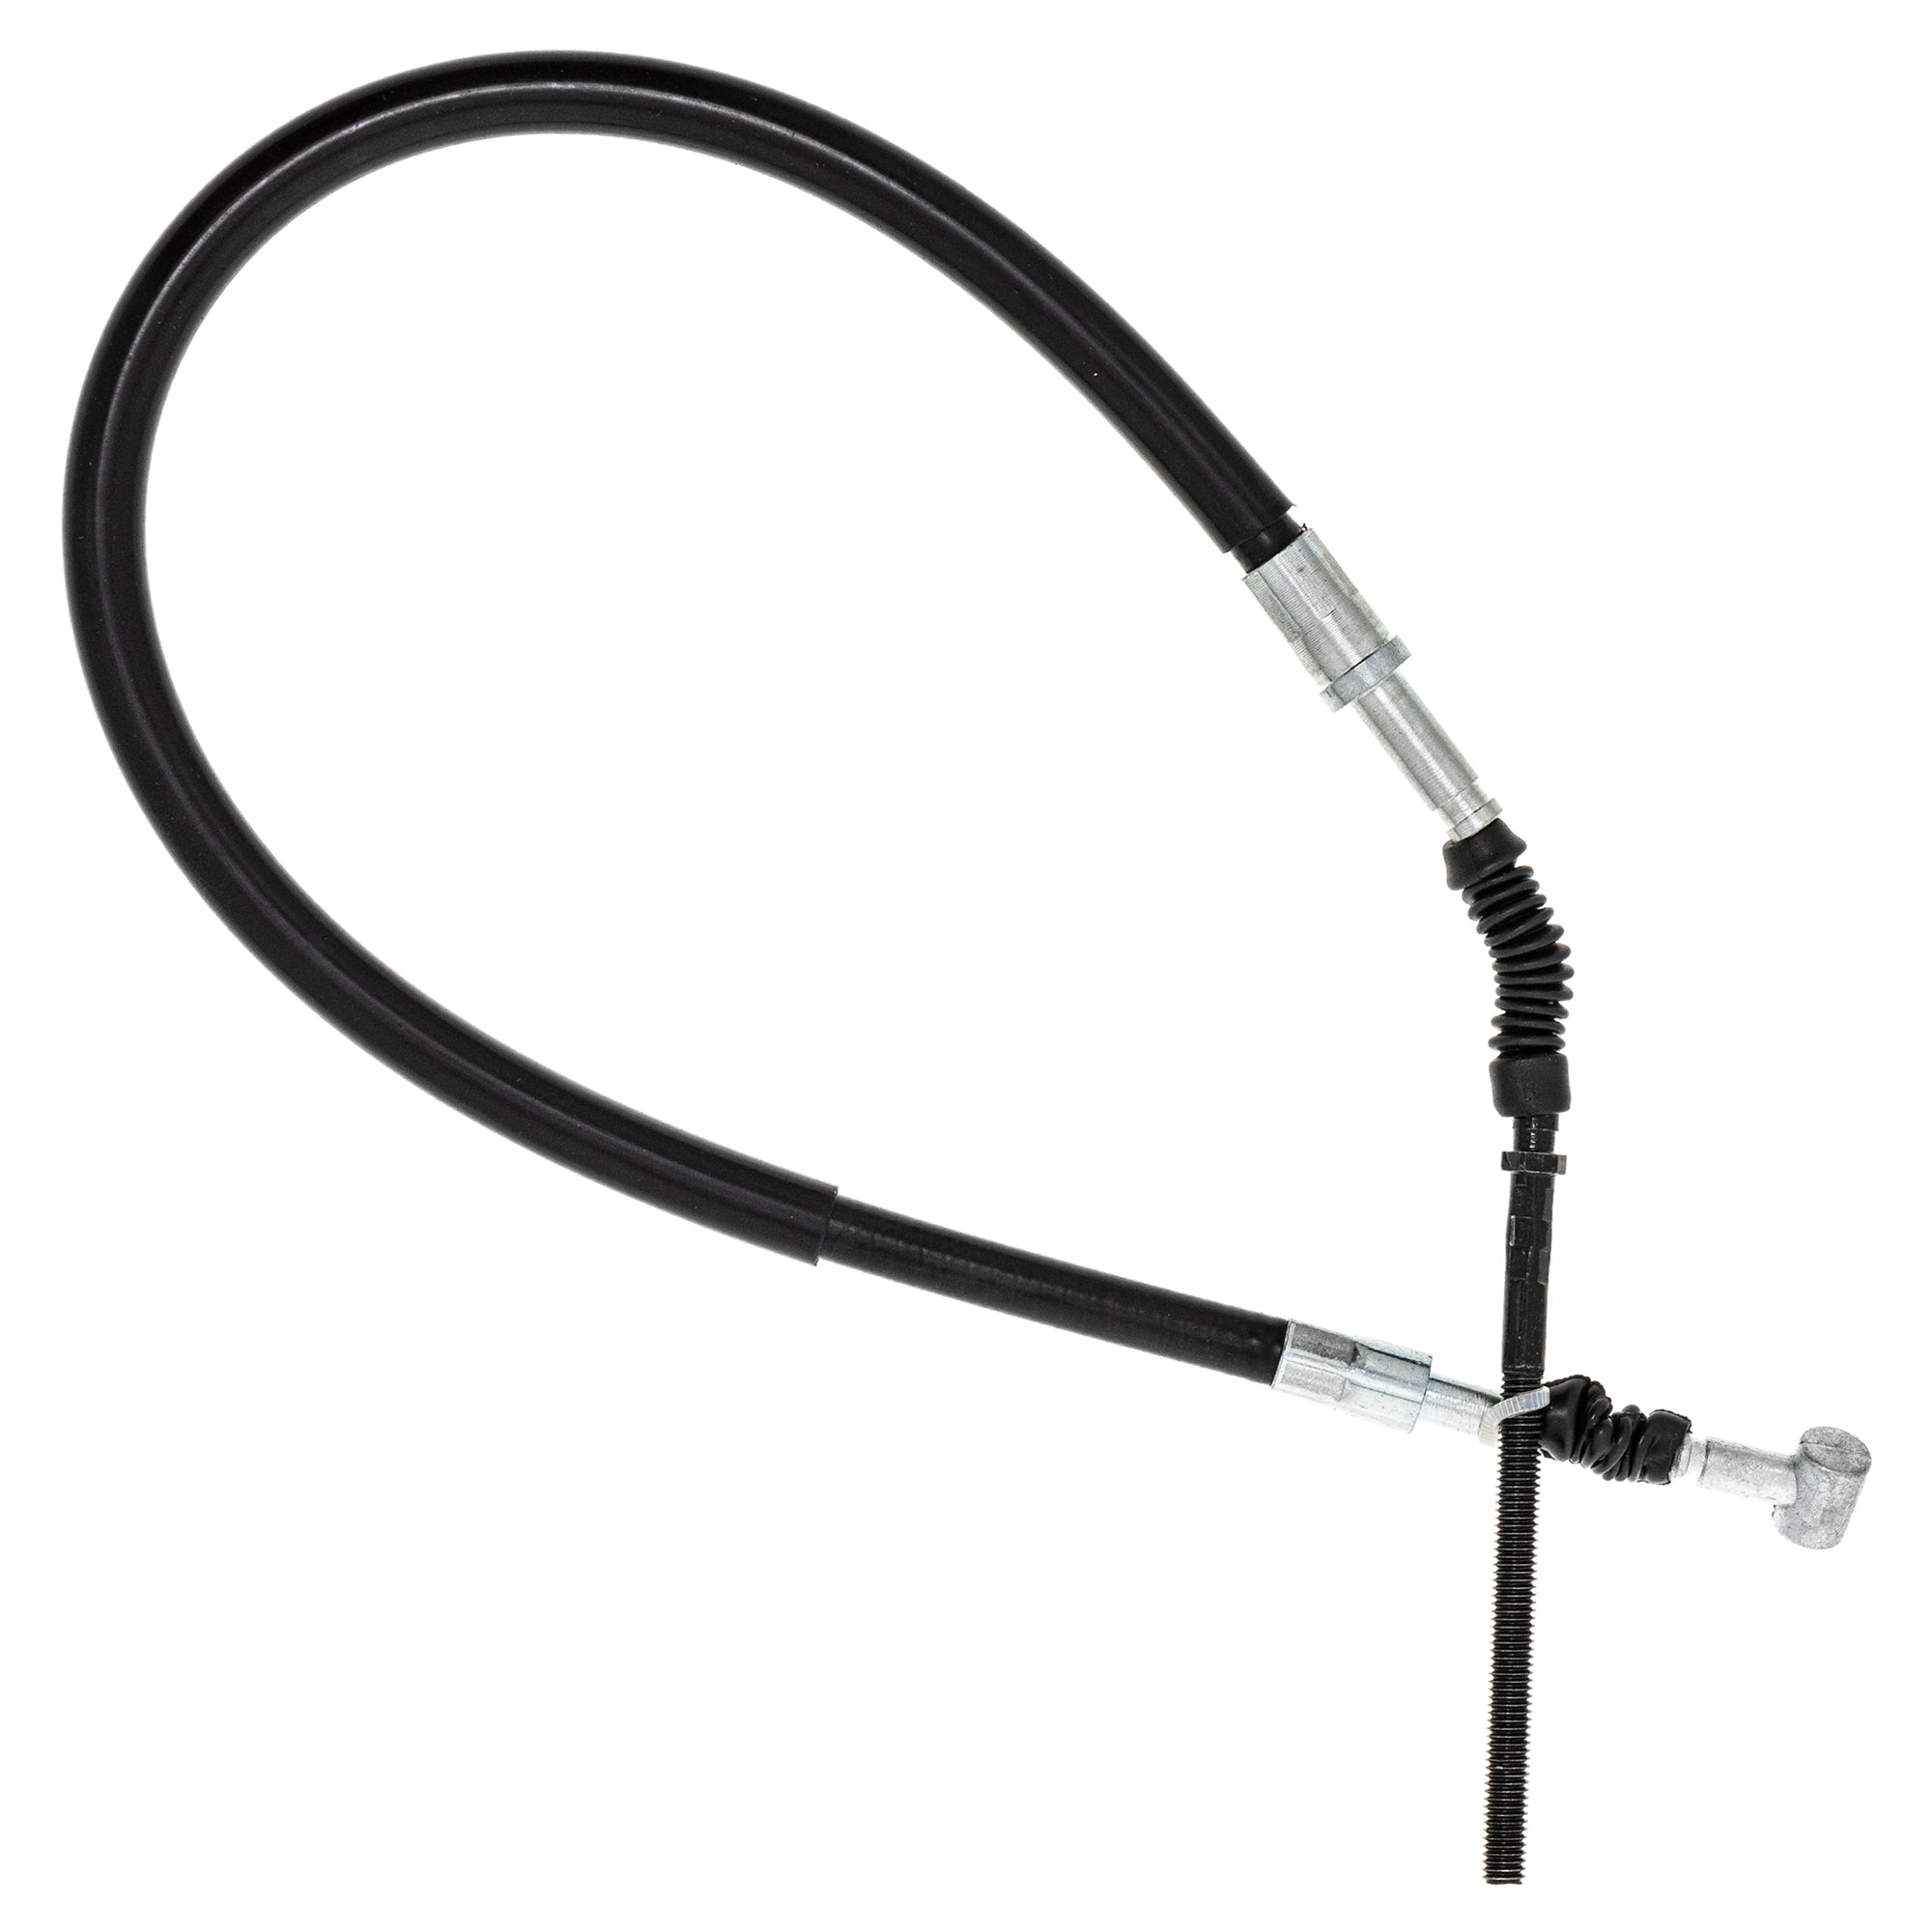 Foot Brake Cable for zOTHER Big ATC250SX NICHE 519-CCB2294L